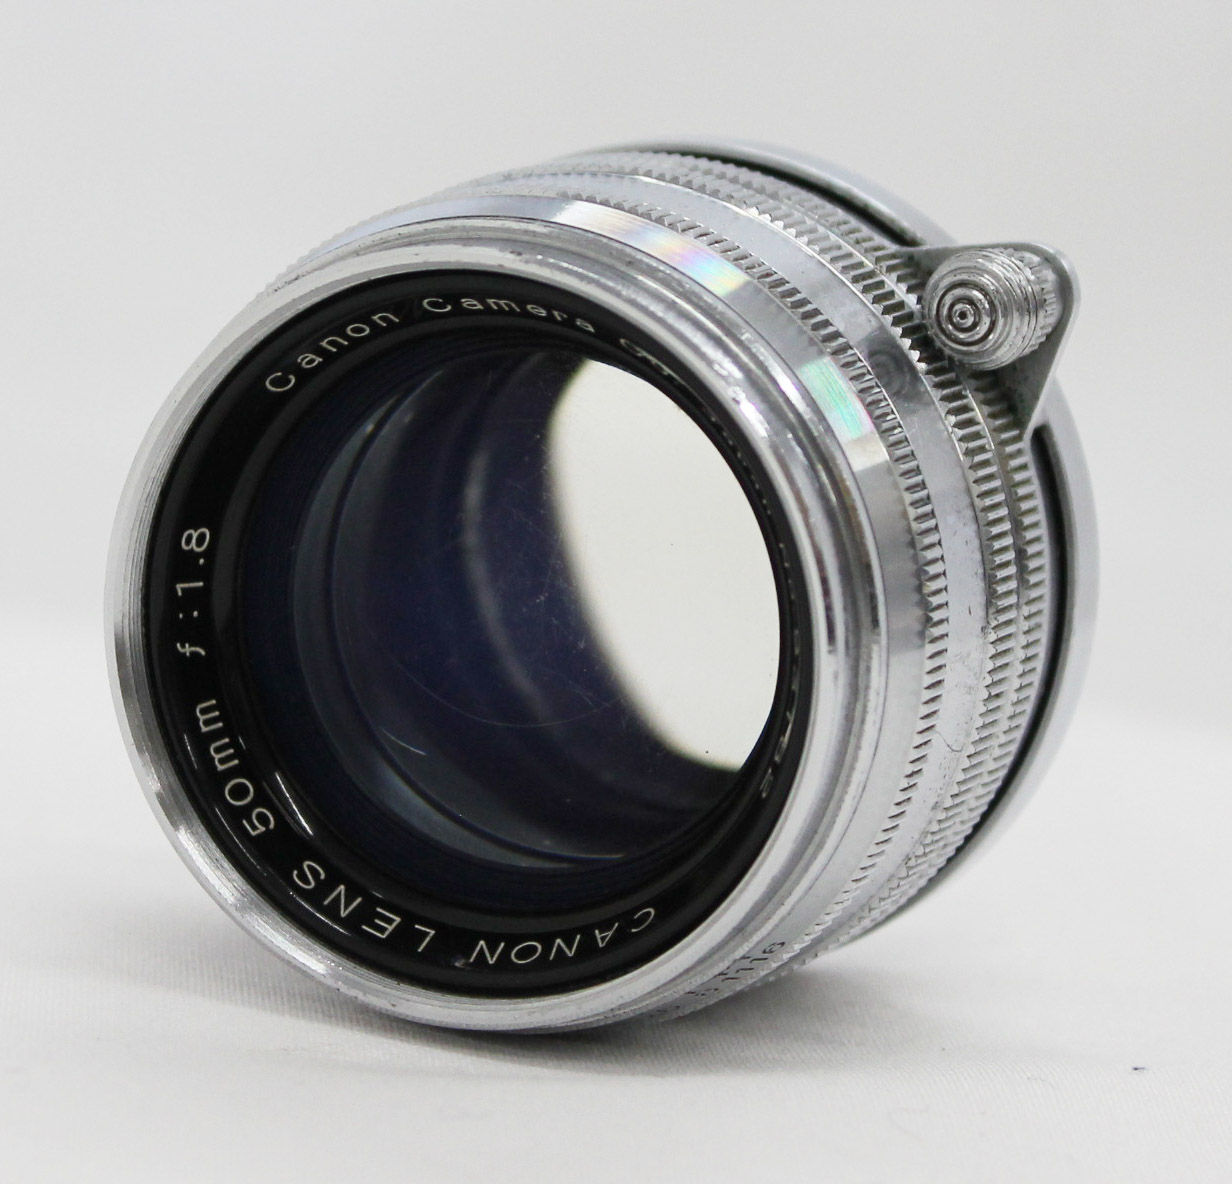 Japan Used Camera Shop | [Excellent++] Canon 50mm F/1.8 Lens L39 LTM Leica Screw Mount Silver from Japan 